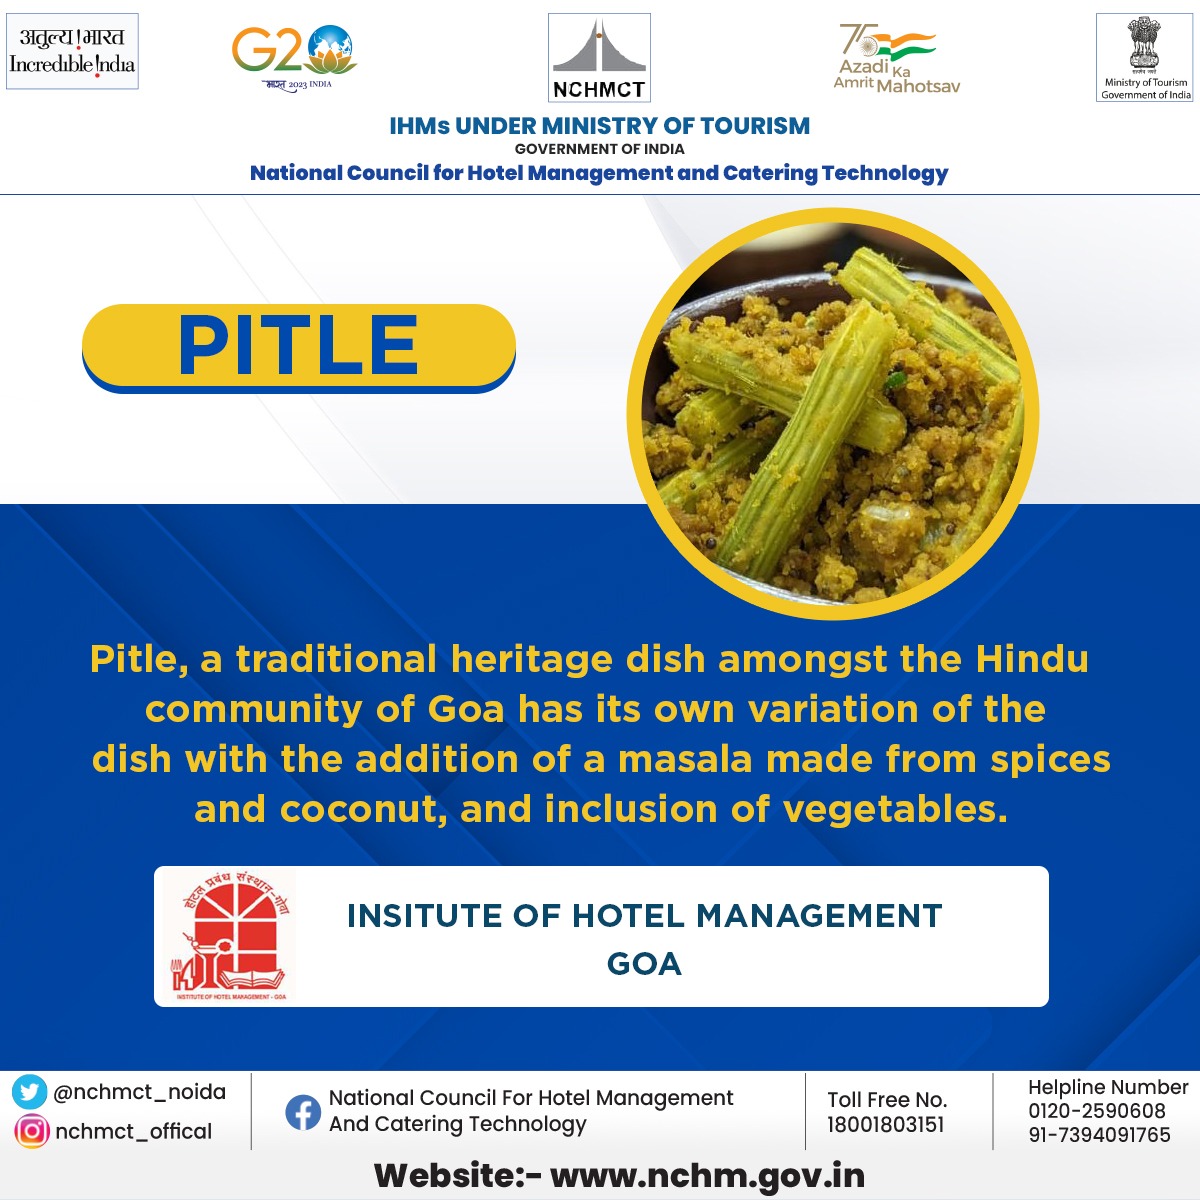 As a part of the ongoing month-long promotional program by NCHMCT in collaboration with Ministry of Tourism on regional cuisine, IHM Goa presents 'Pitle' a traditional heritage dish amongst the Hindu community of Goa.
#GoanCuisine #CulinaryFest